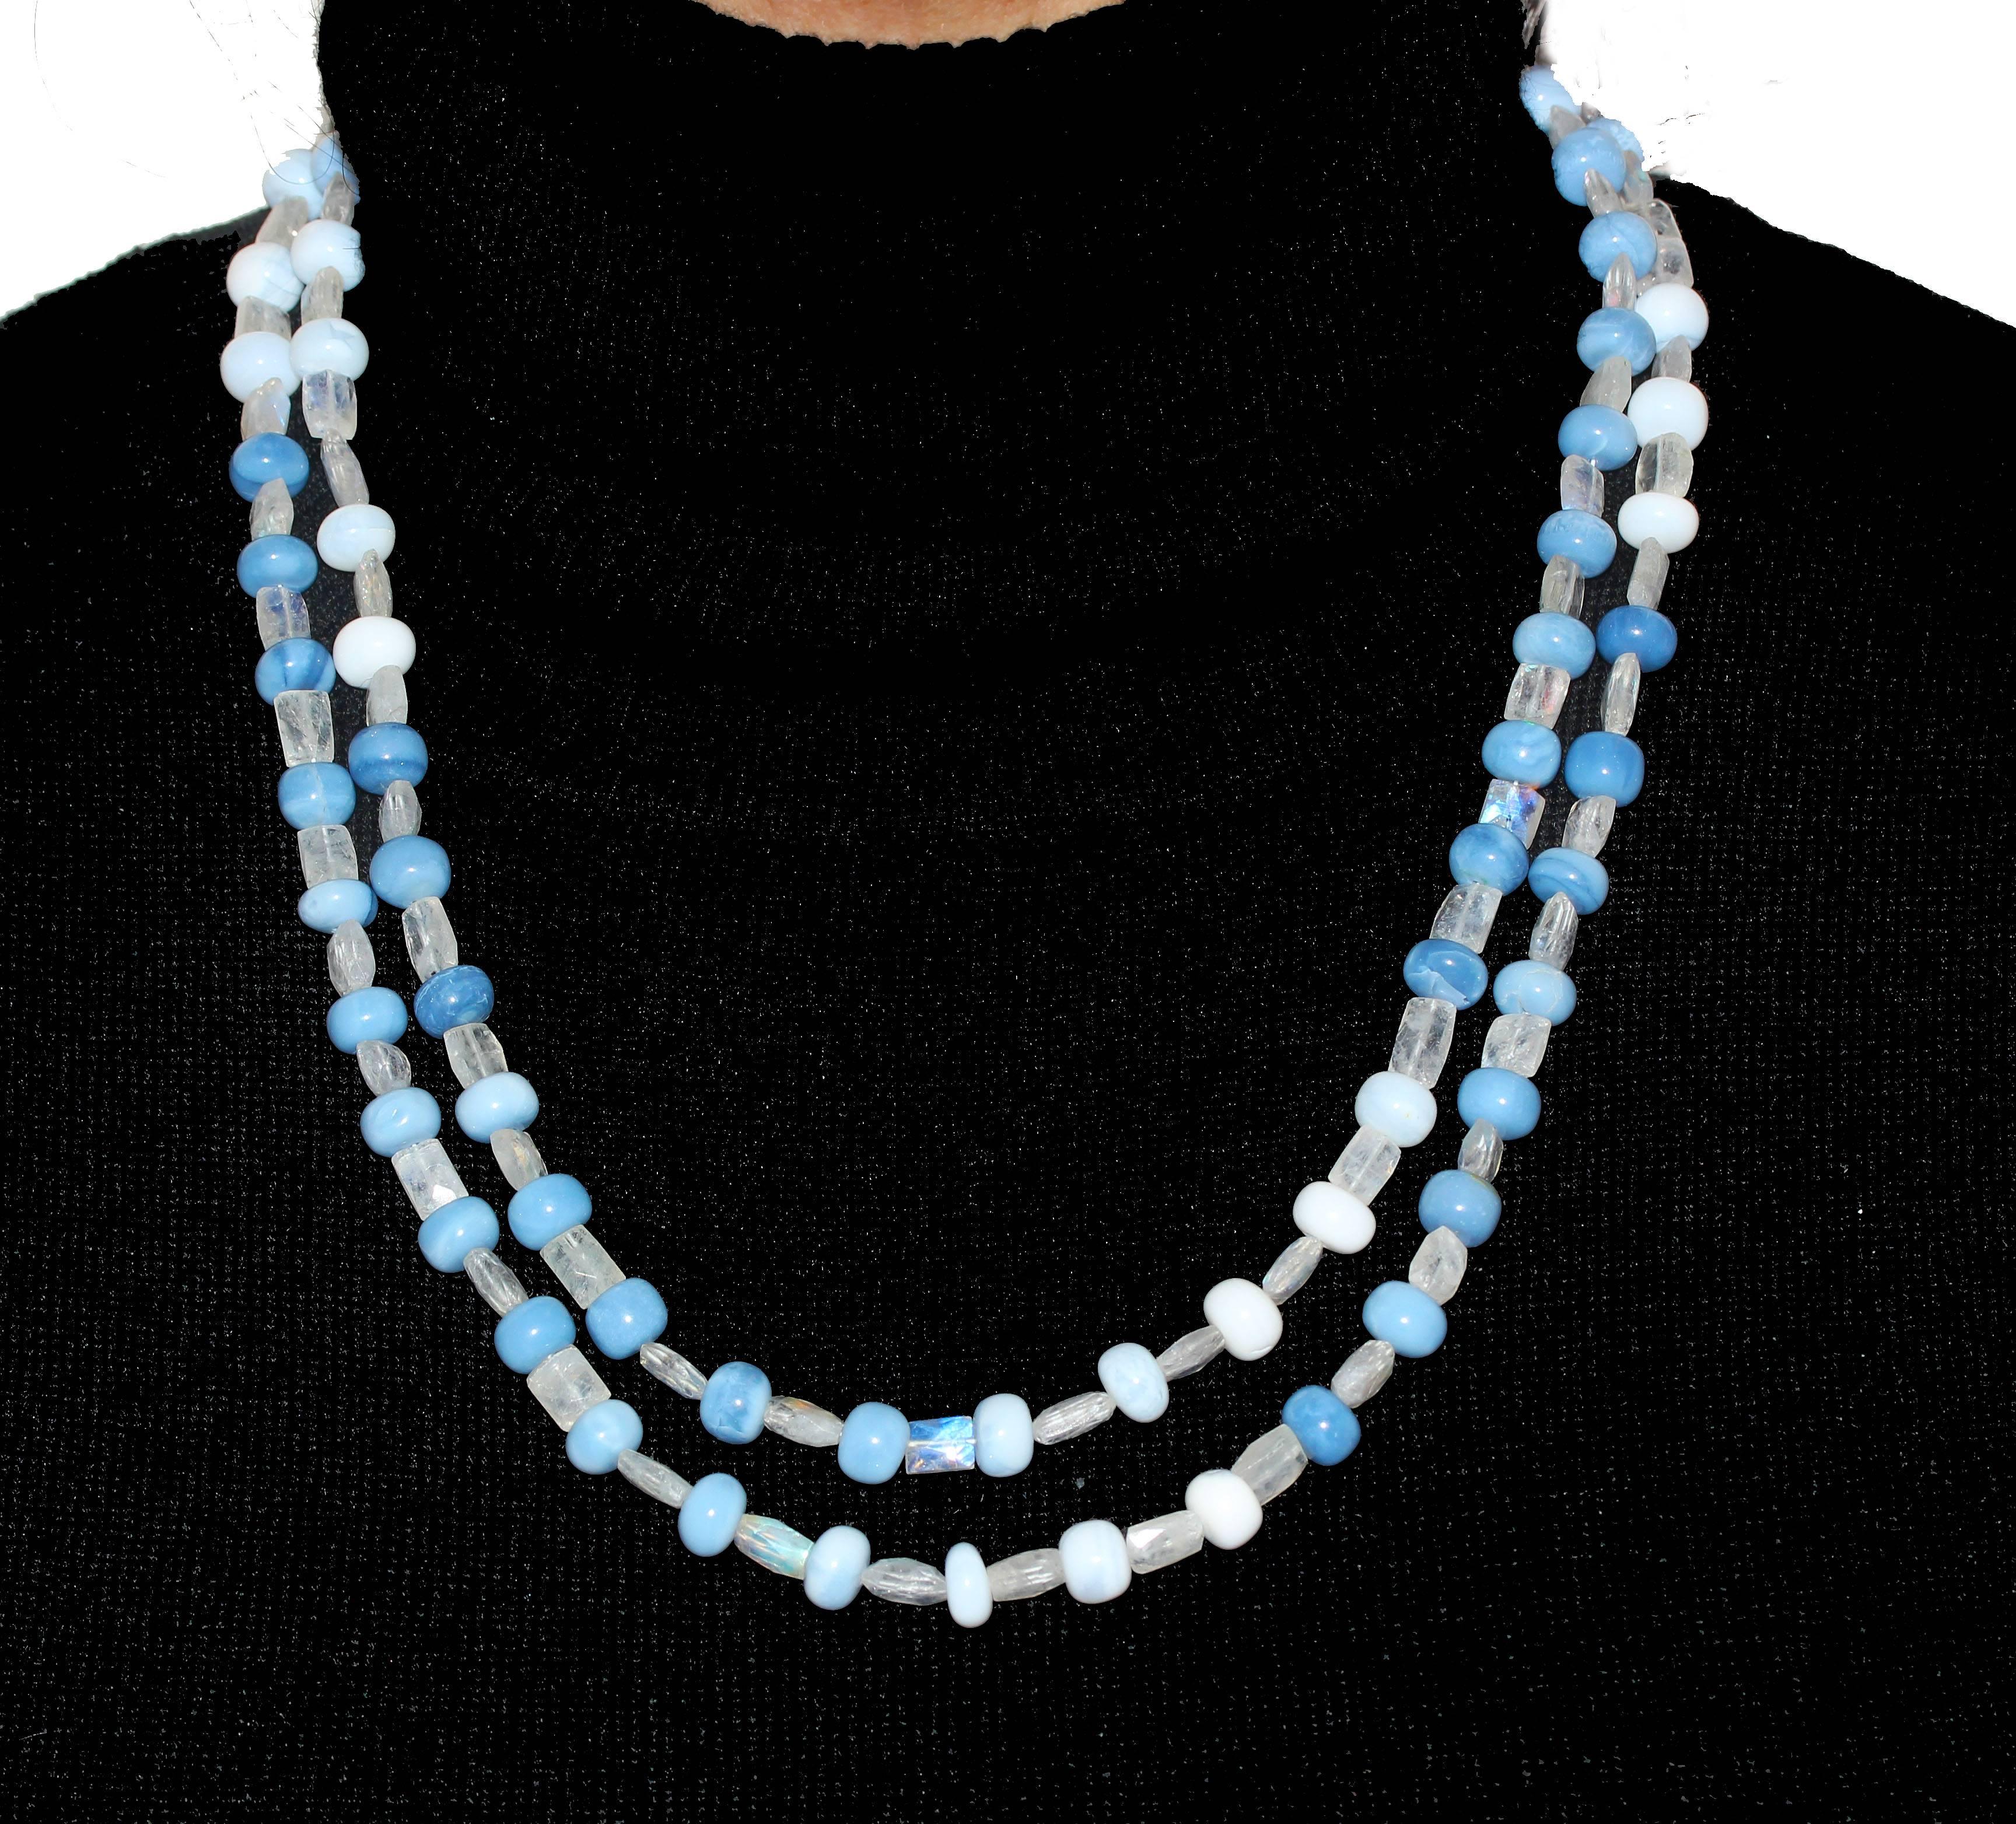 Shaded from dark blue to white-ish these rare beautiful newly discovered Peruvian Opal gemstones are enhanced with glowing gems of natural Moonstone set with a sterling silver clasp.  This necklace is 21 inches long and is perfect for day into night